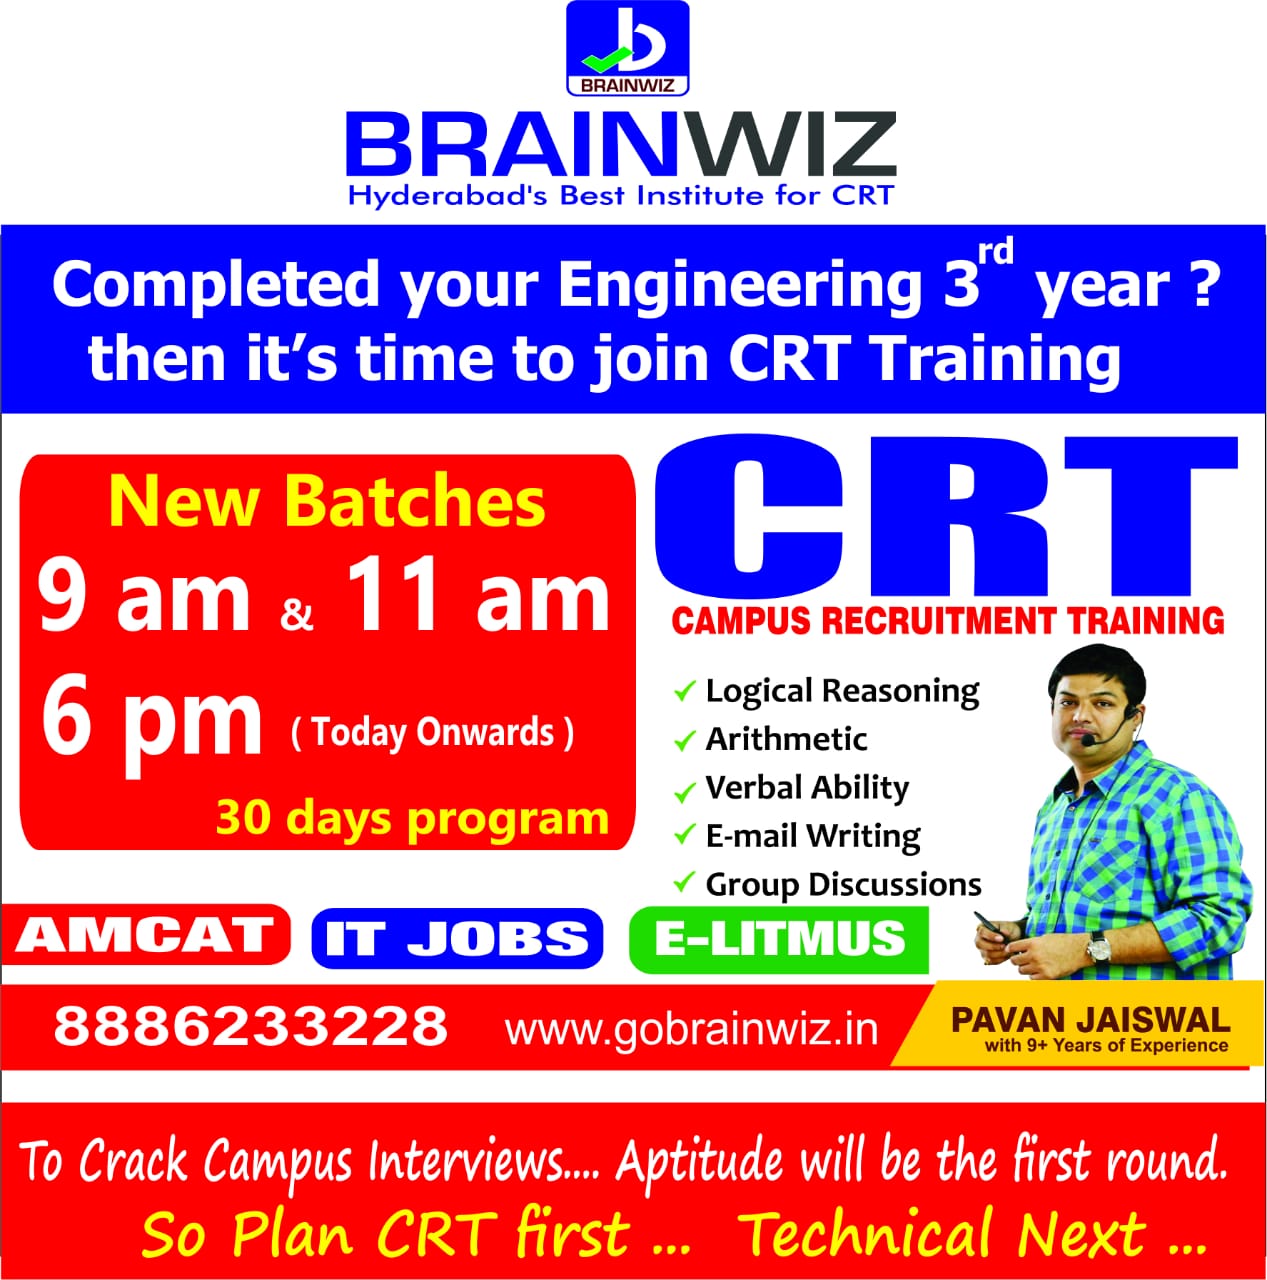 Get Exclusive Training on CRT by Pavan Jaiswal at BRAINWIZ. Attend a FREE DEMO @ 9 am on 24th August in Ameerpet, Hyderabad, Hyderabad, Telangana, India